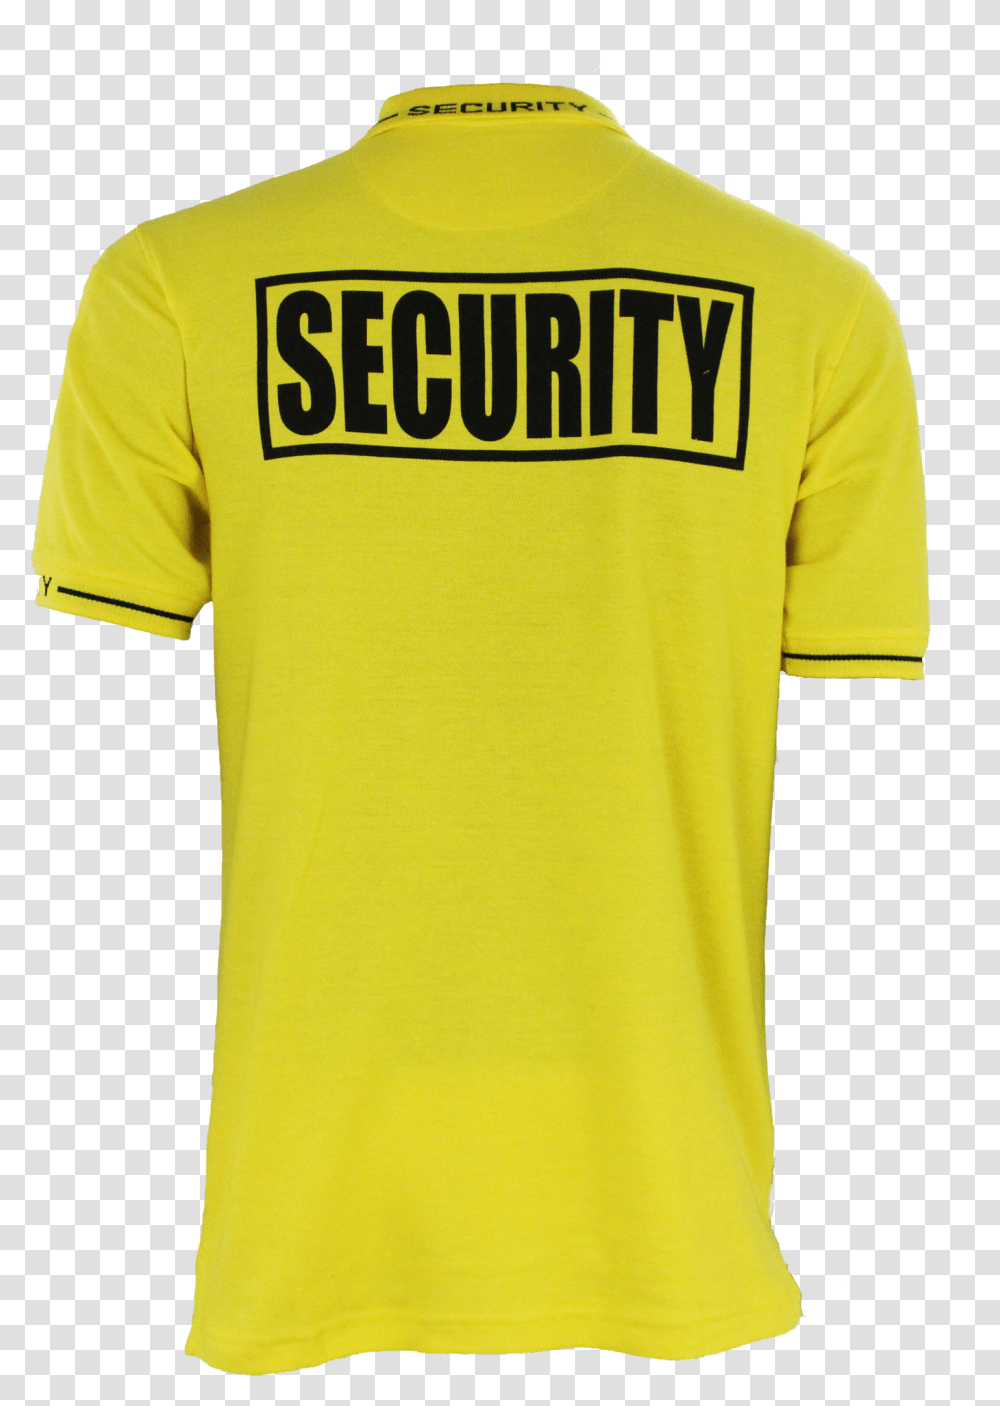 Customize Your Own Garments Yellow Security Polo Shirts, Apparel, Jersey, T-Shirt Transparent Png